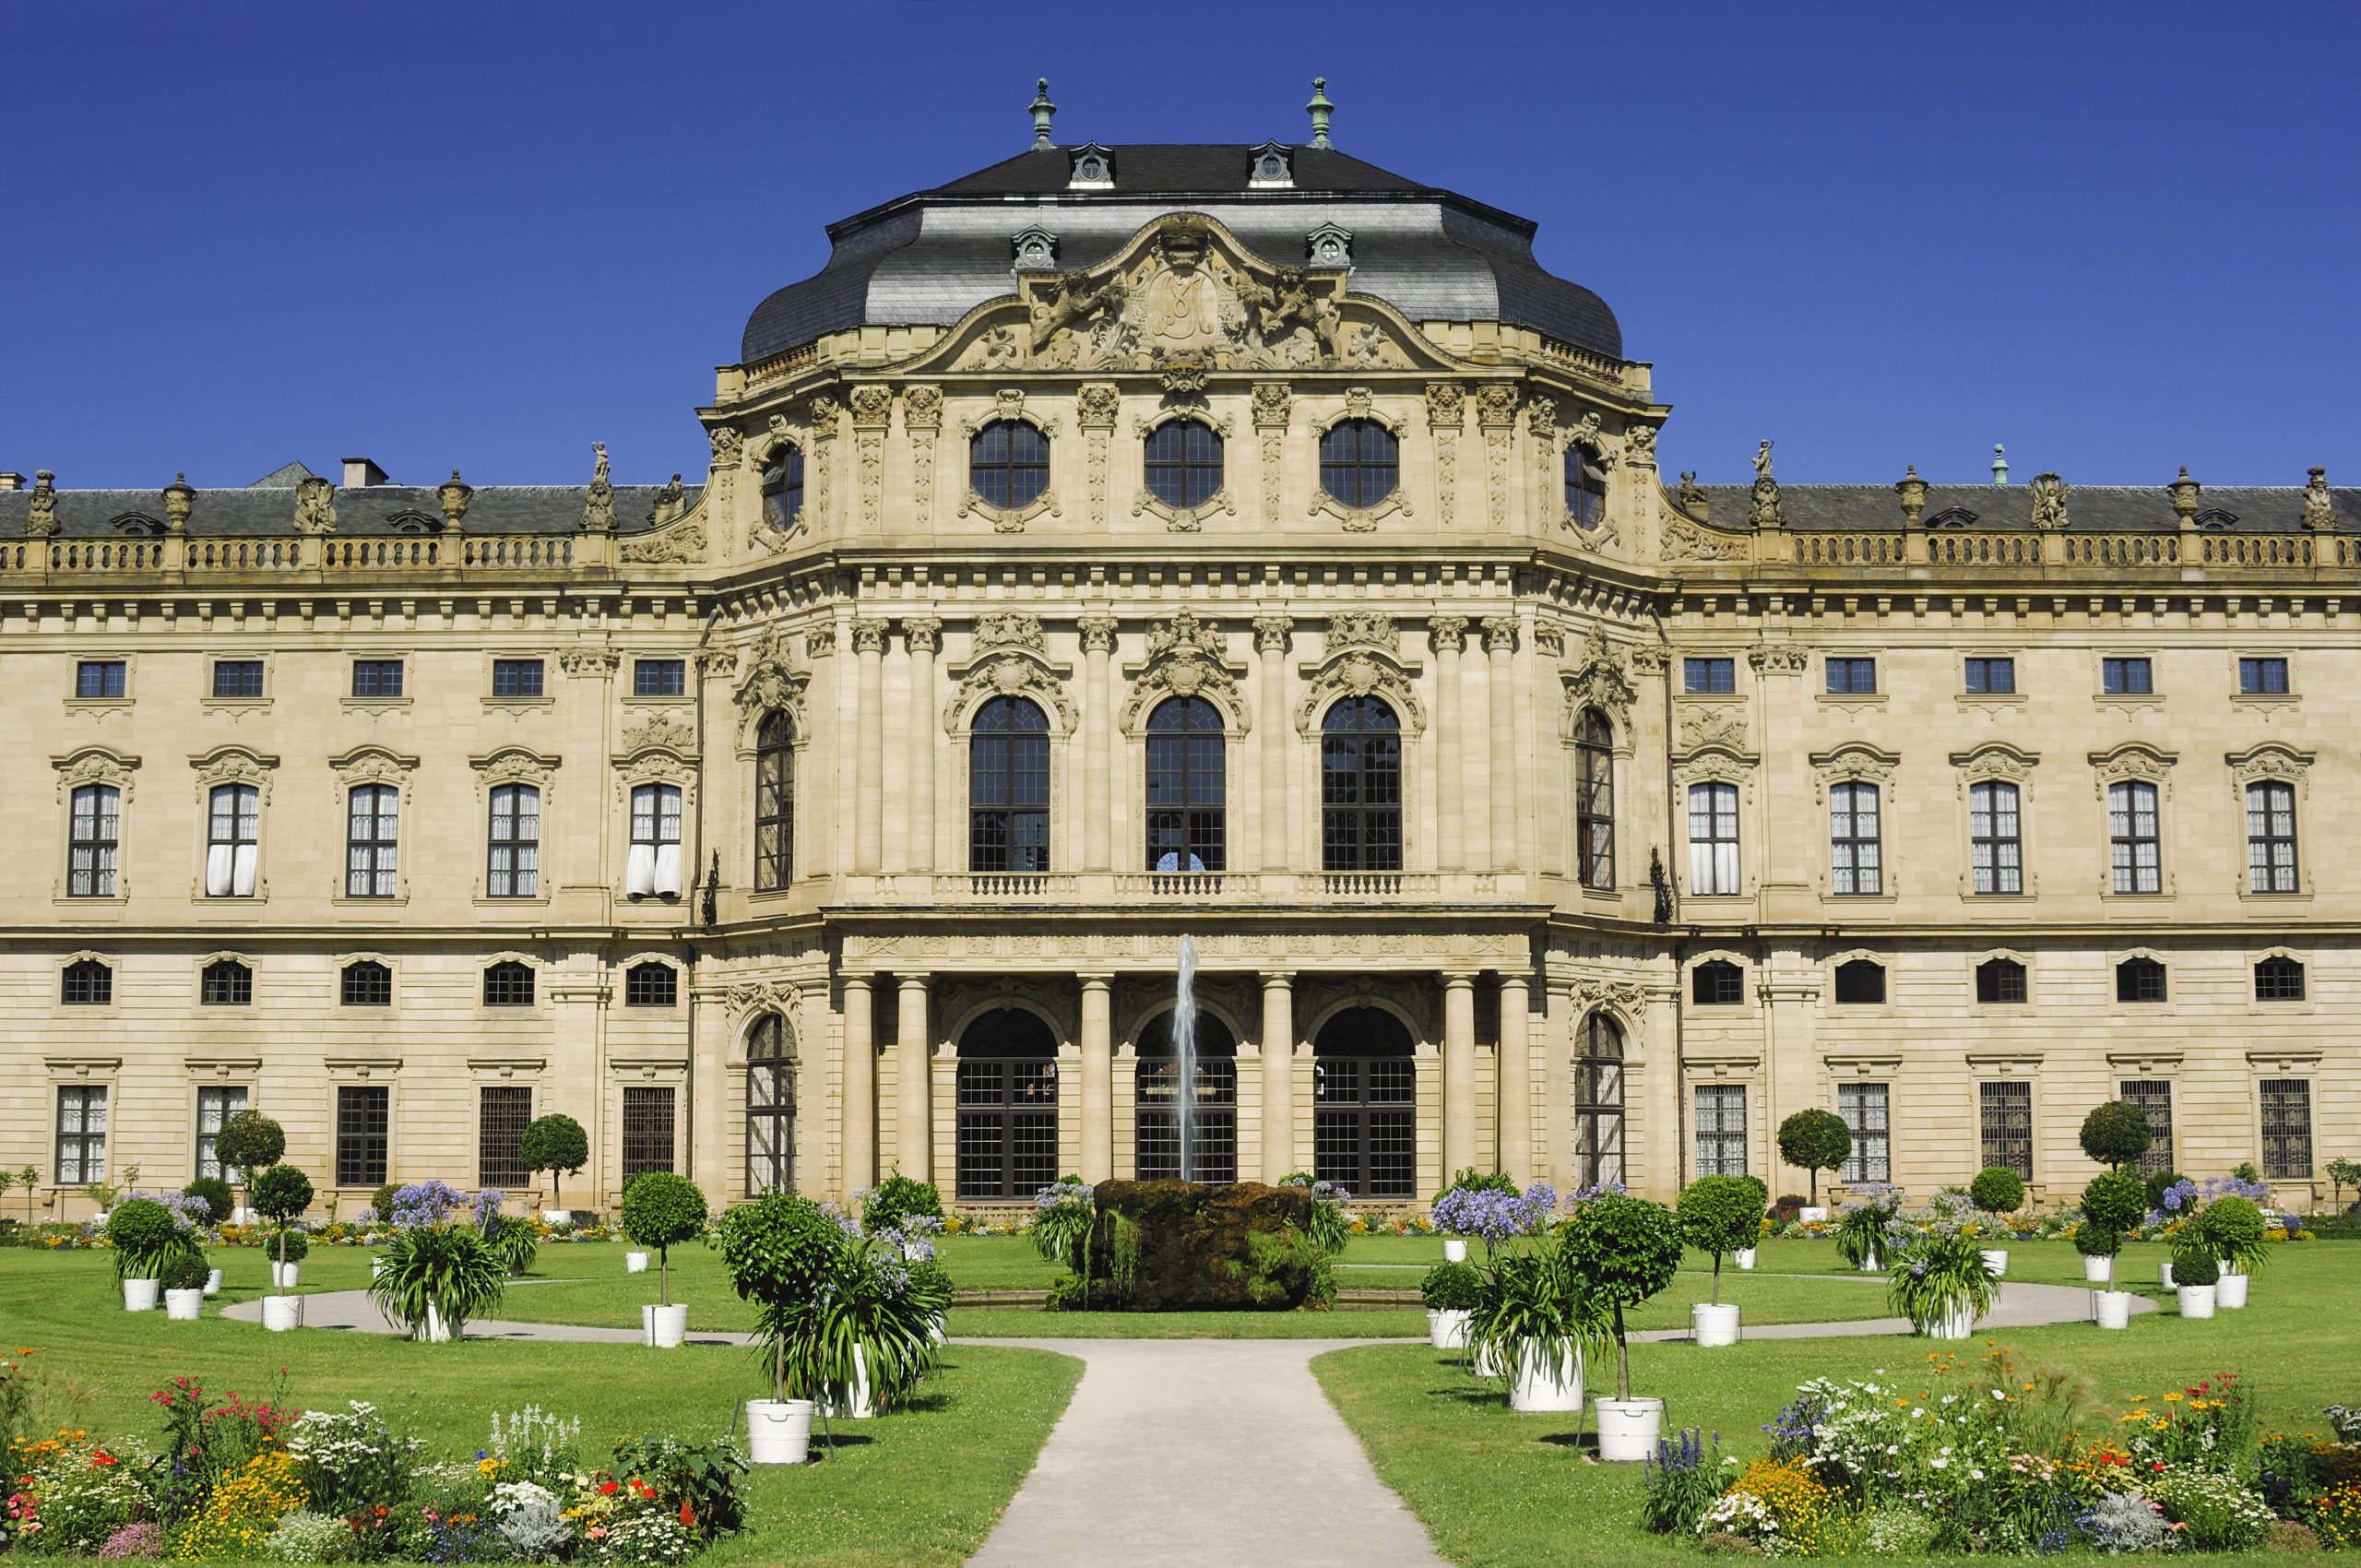 The impressive baroque palace Würzburg on a sunny day with it's beautiful green garden in the front